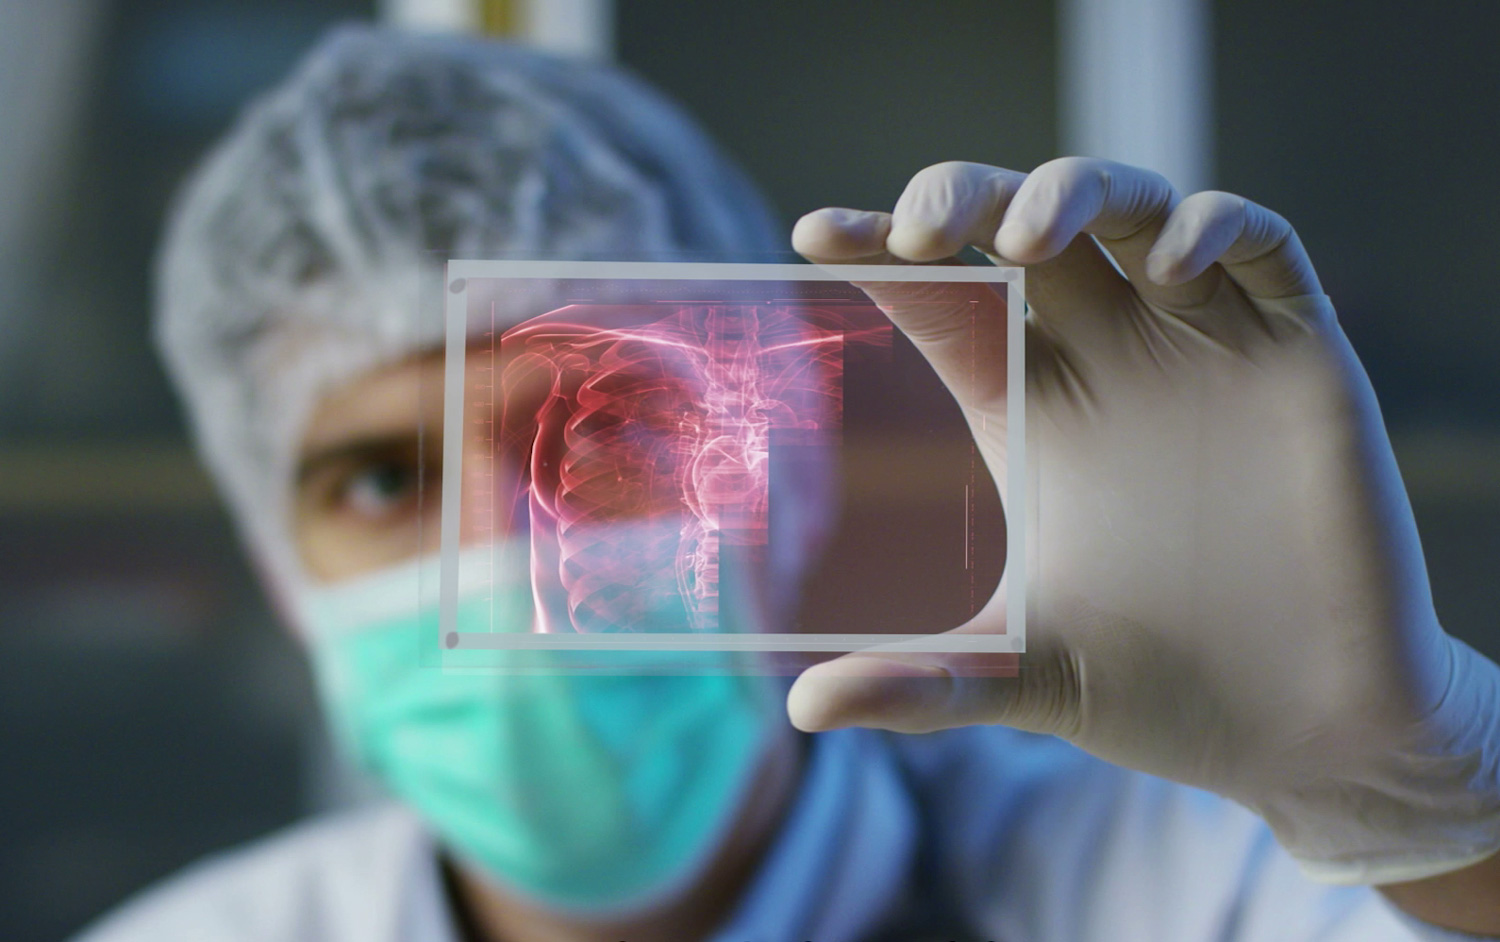 A doctor views the patient's anatomy in the form of a hologram